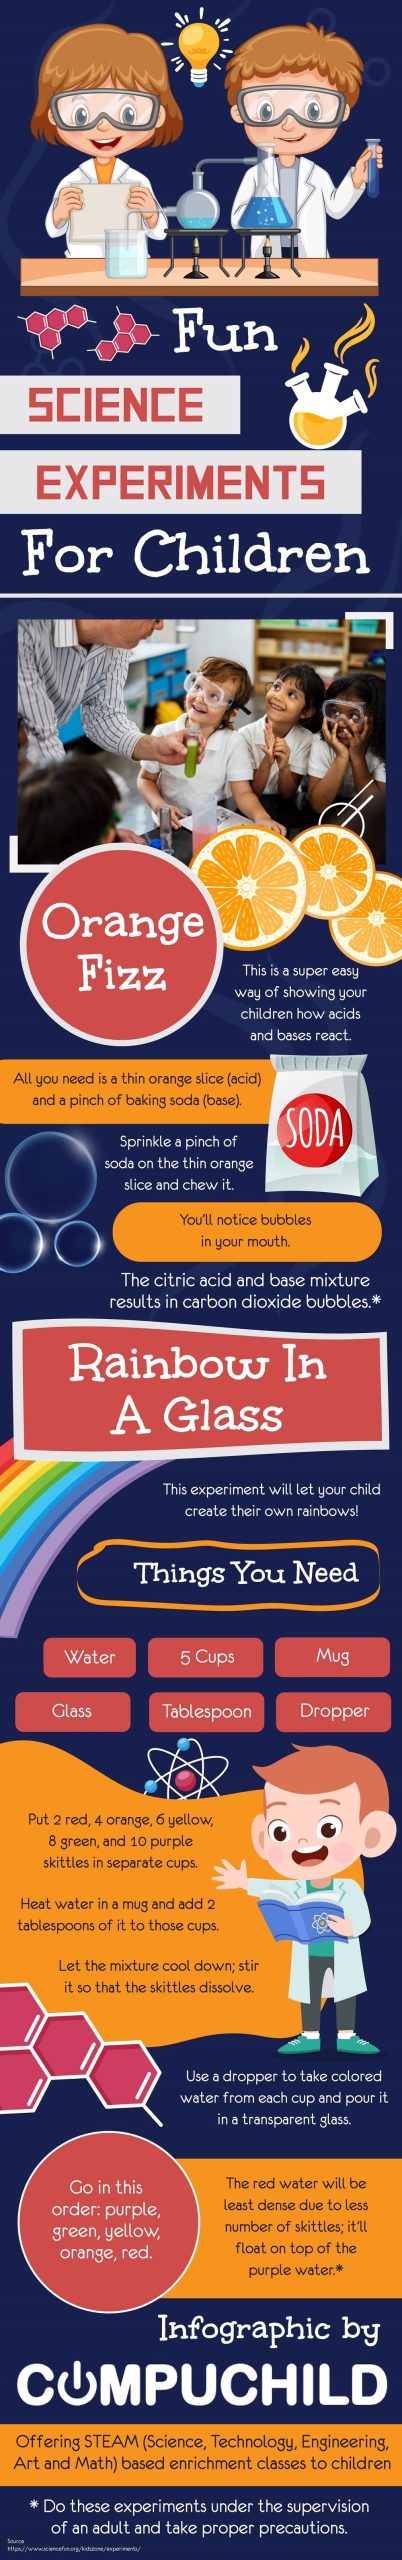 Fun Science Experiments For Children_jpg_85